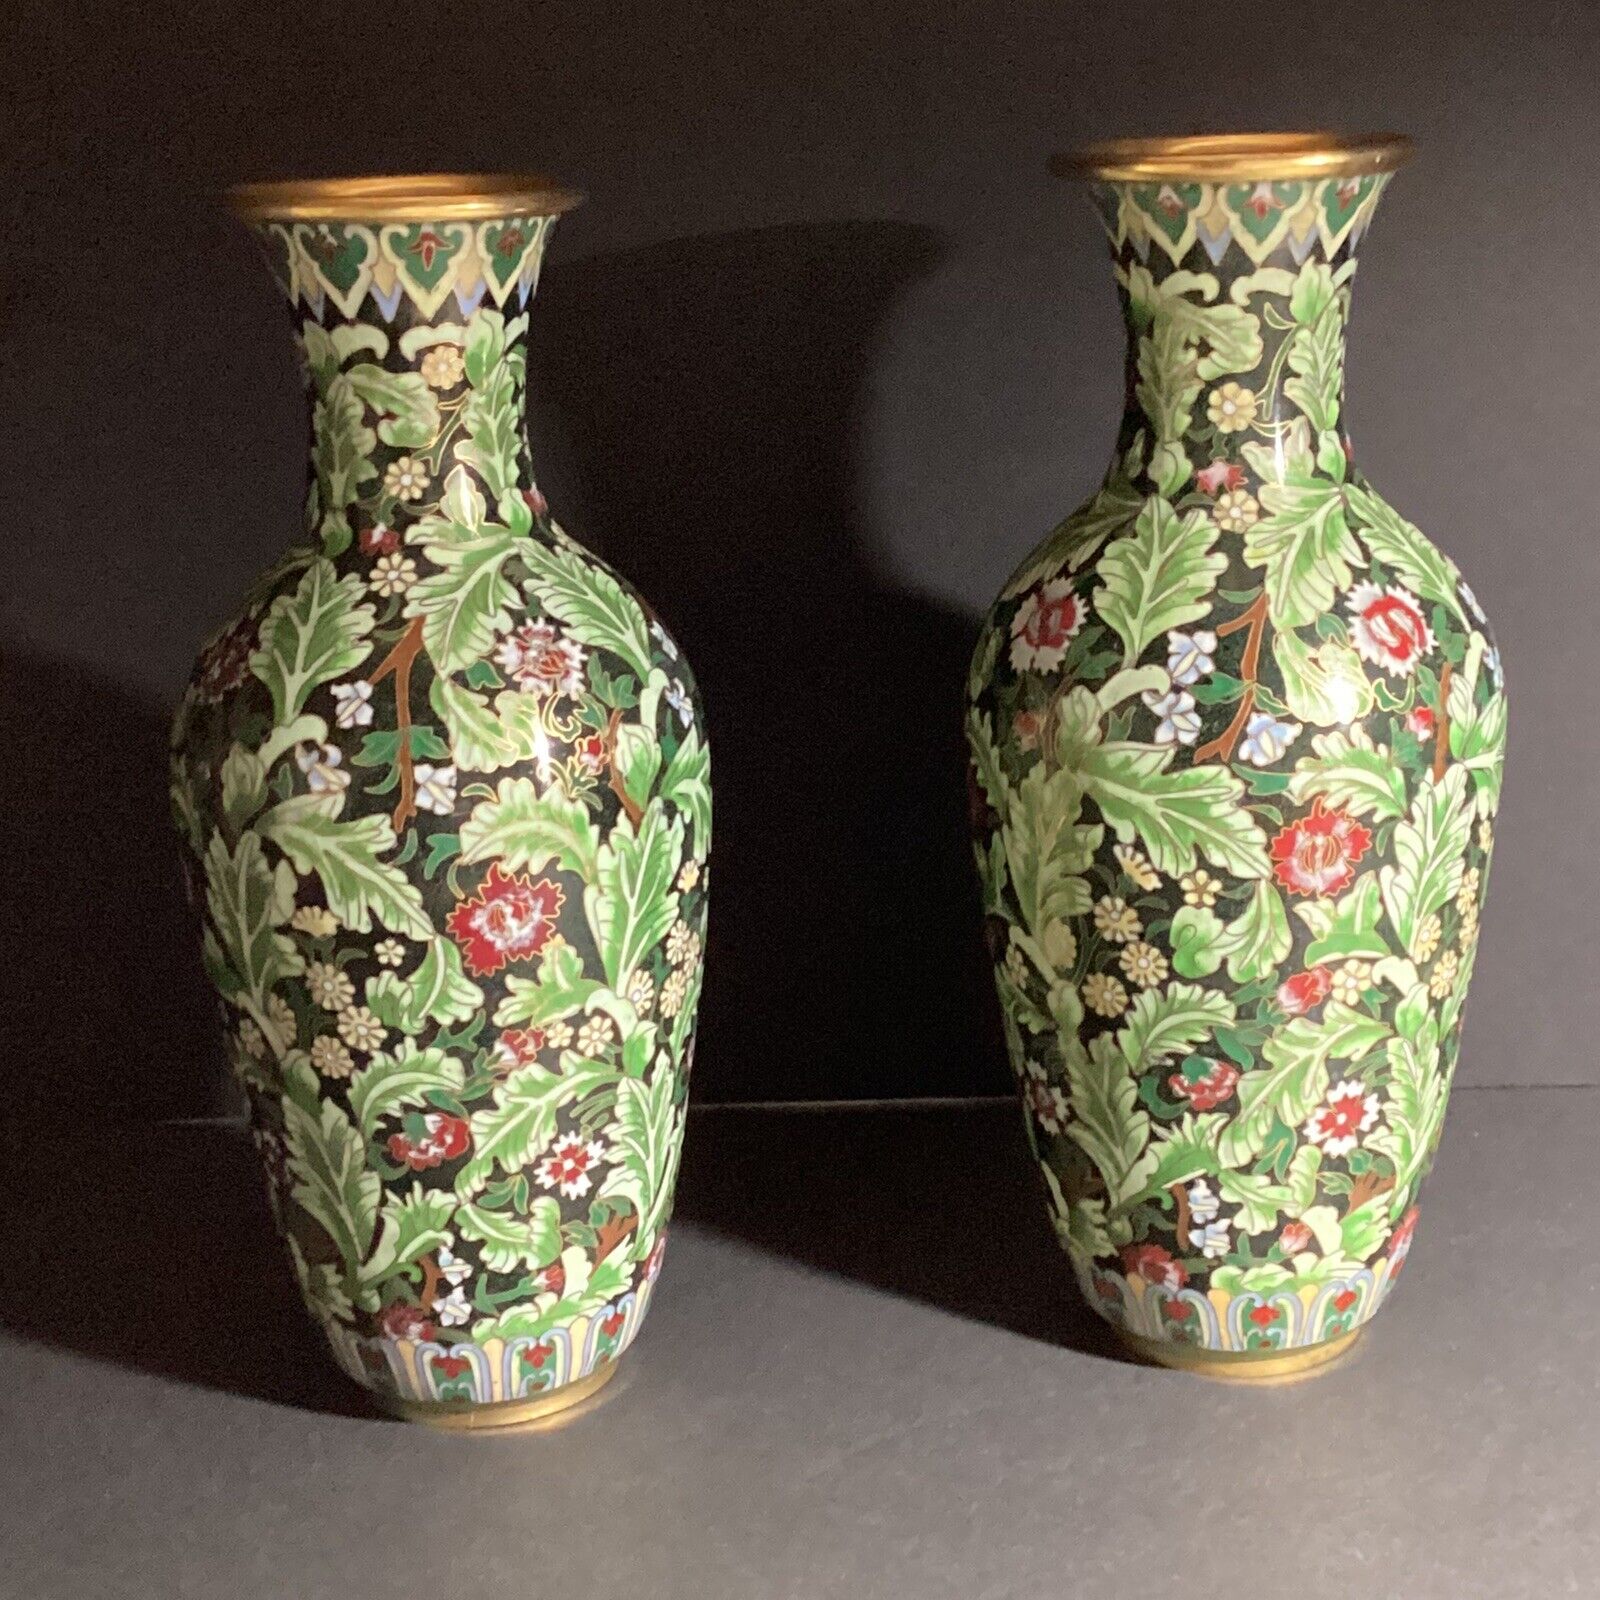 Pair scarce Chinese cloisonné traditional vintage inlaid enamel Vases 10.25”H